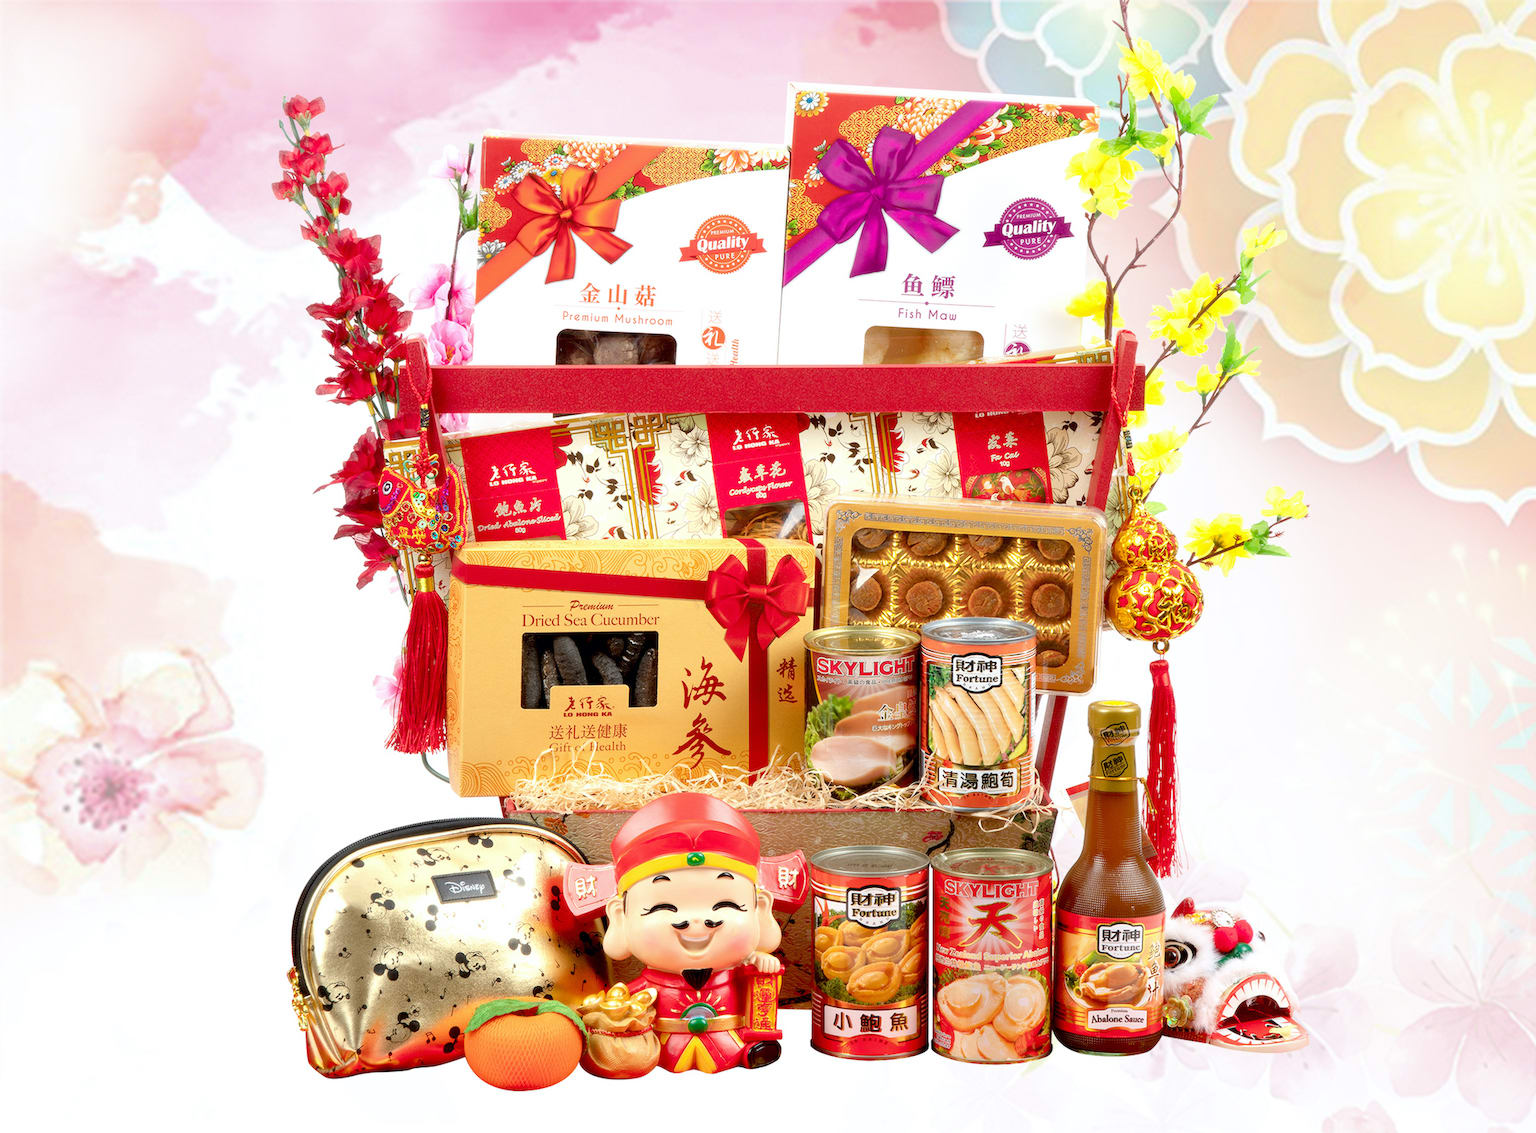 9 Best Chinese New Year Hampers to Buy Online in Singapore 2020